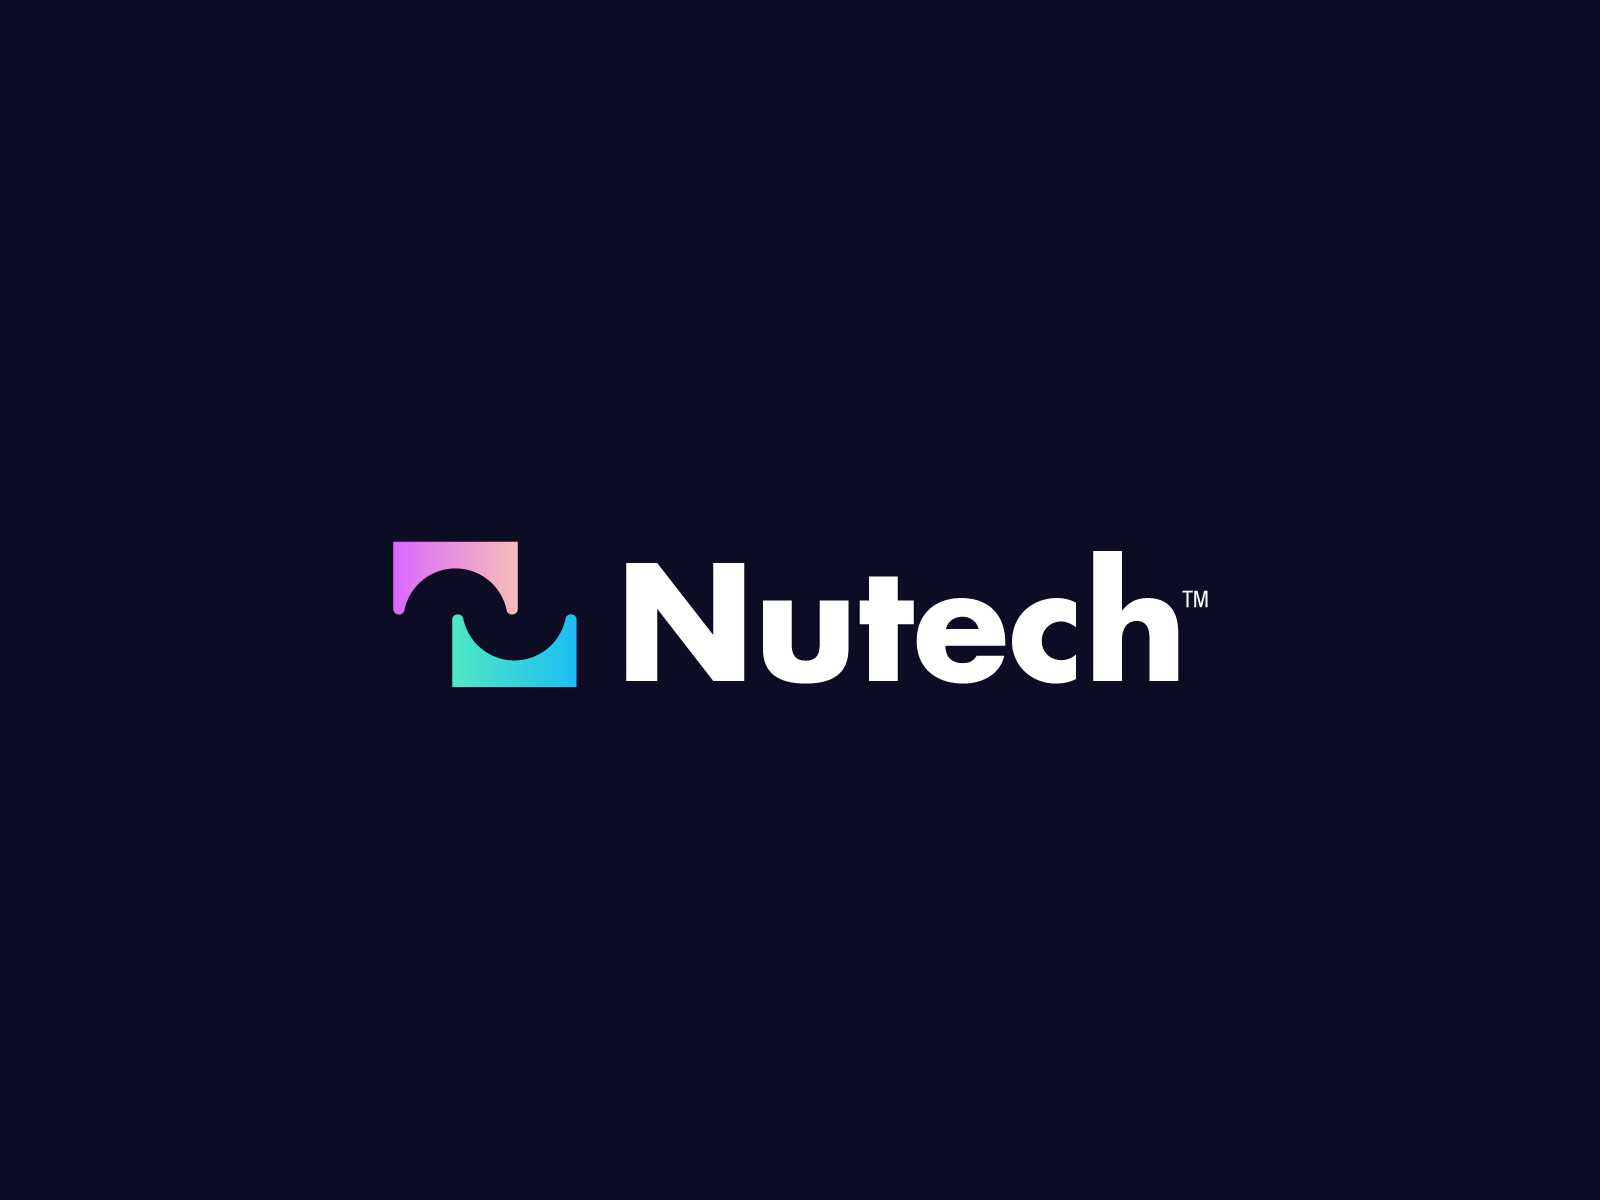 Logo design for Nutech by CreativeSoup on Dribbble